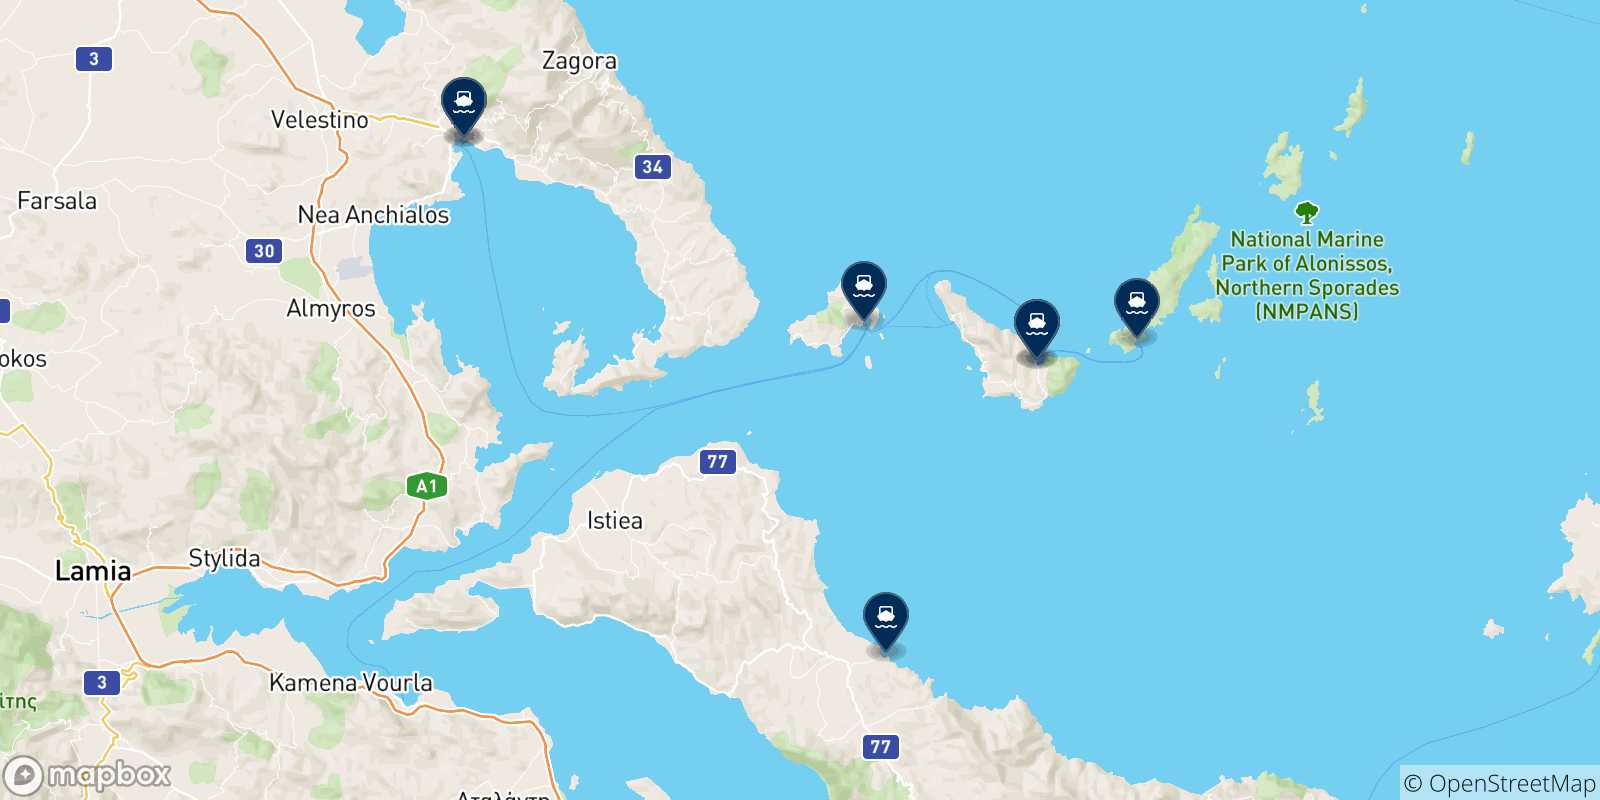 Map of the possible routes between Volos and Greece